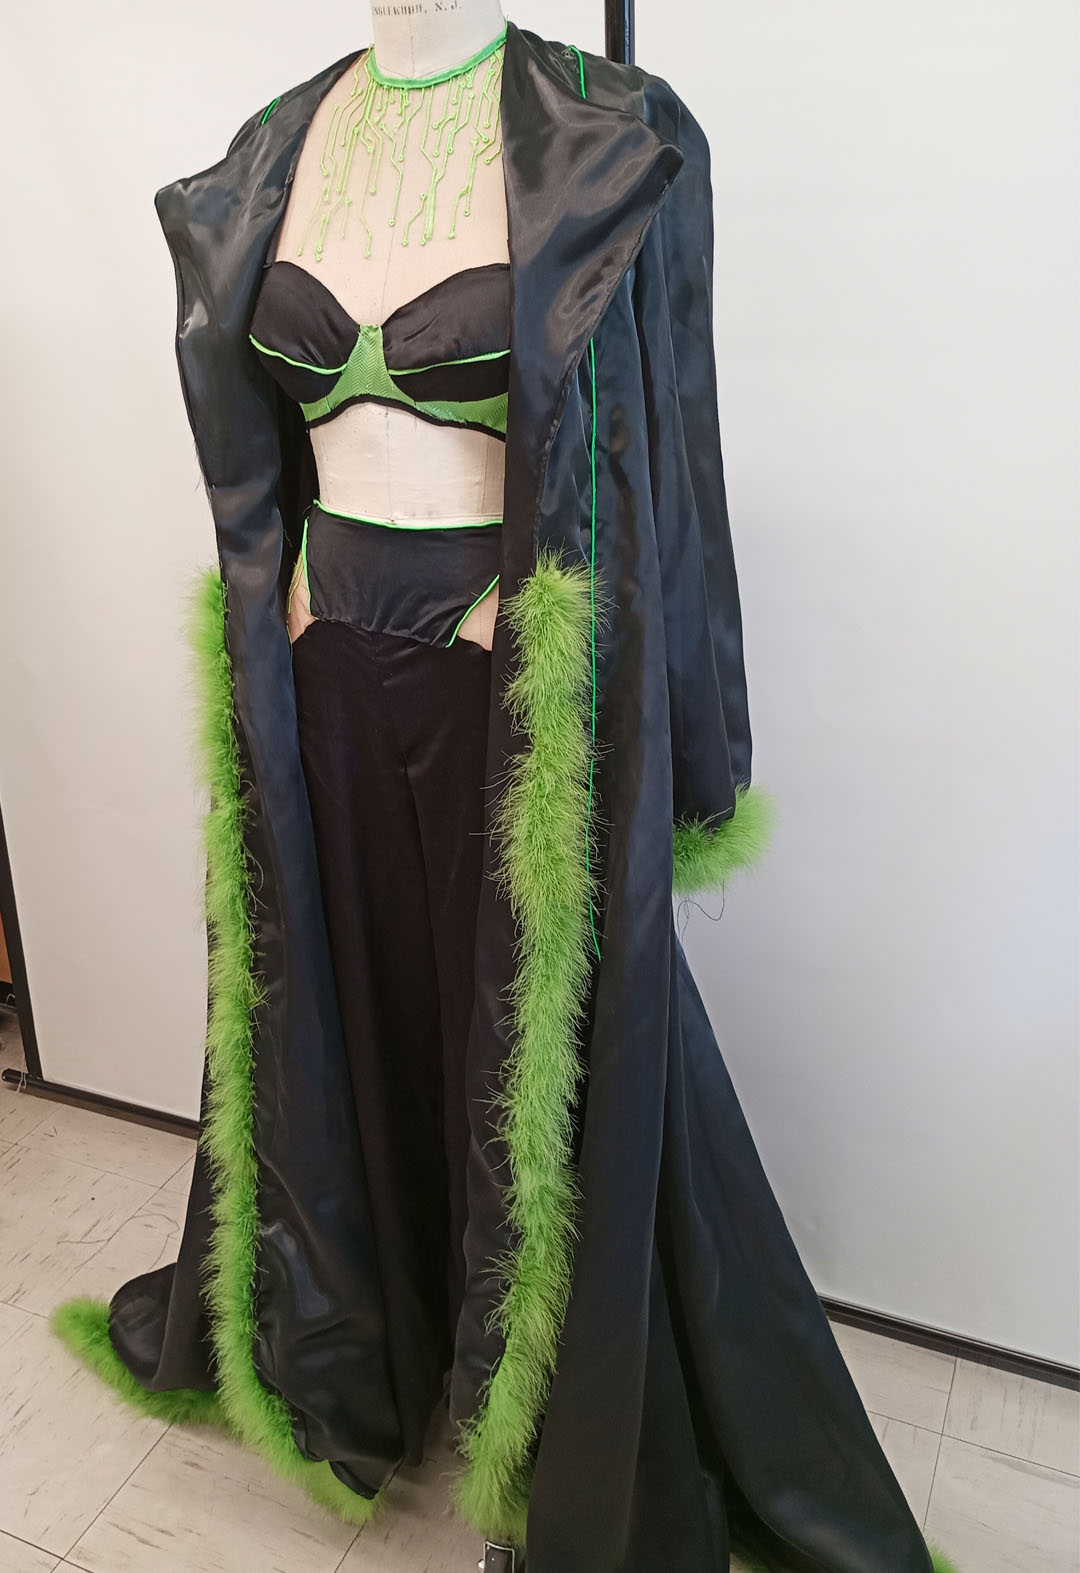 The two-piece set with its matching robe. The robe has green EL wiring glowing, as well as a marabou feather trim around the hem and sleeve cuffs.